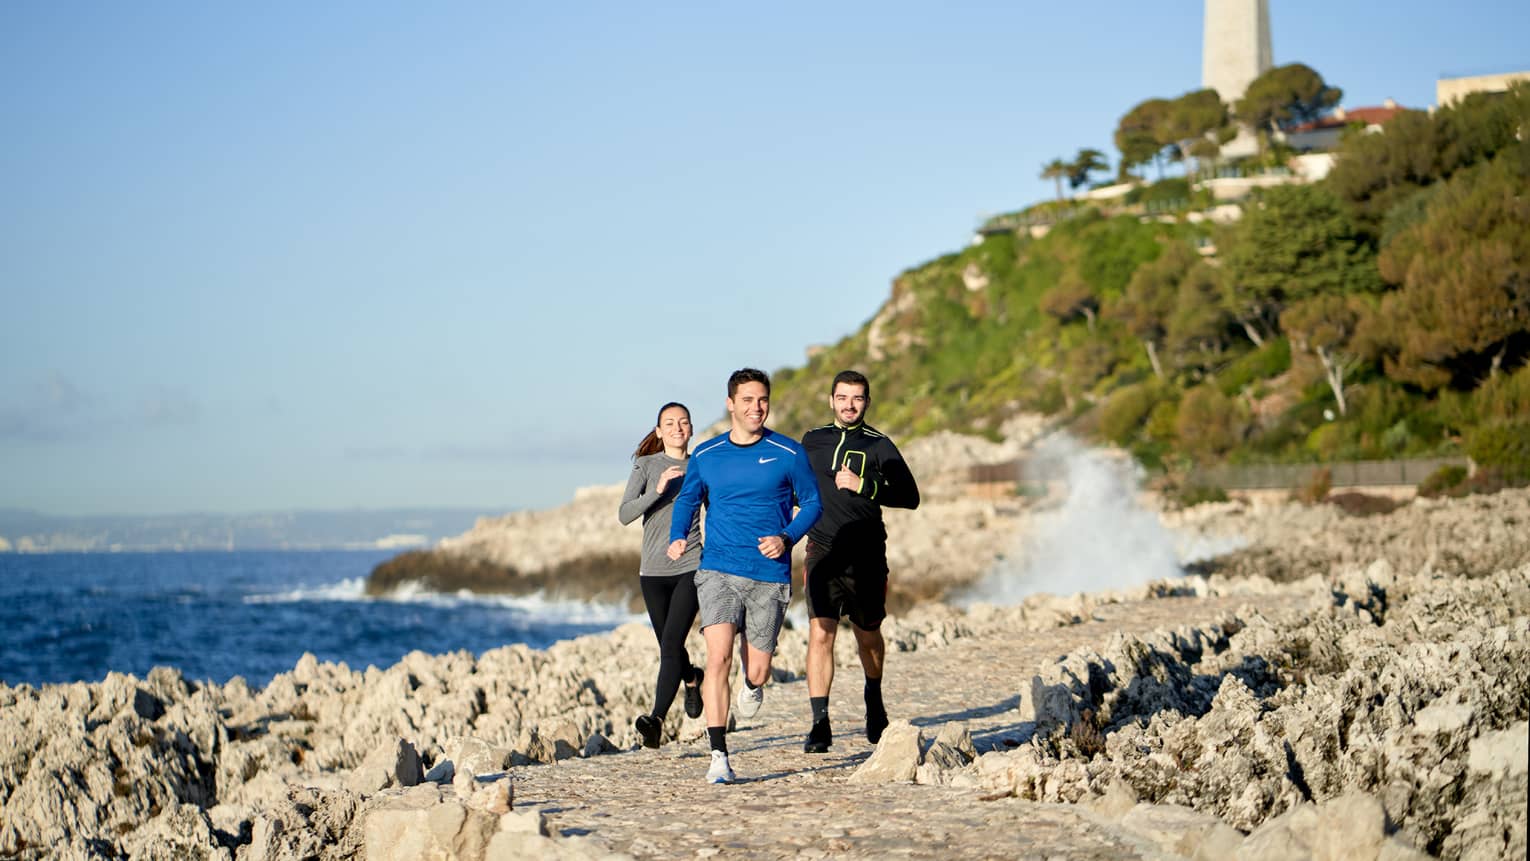 Three people jogging, smiling, on rocky trail beside the sea, lighthouse in backdrop